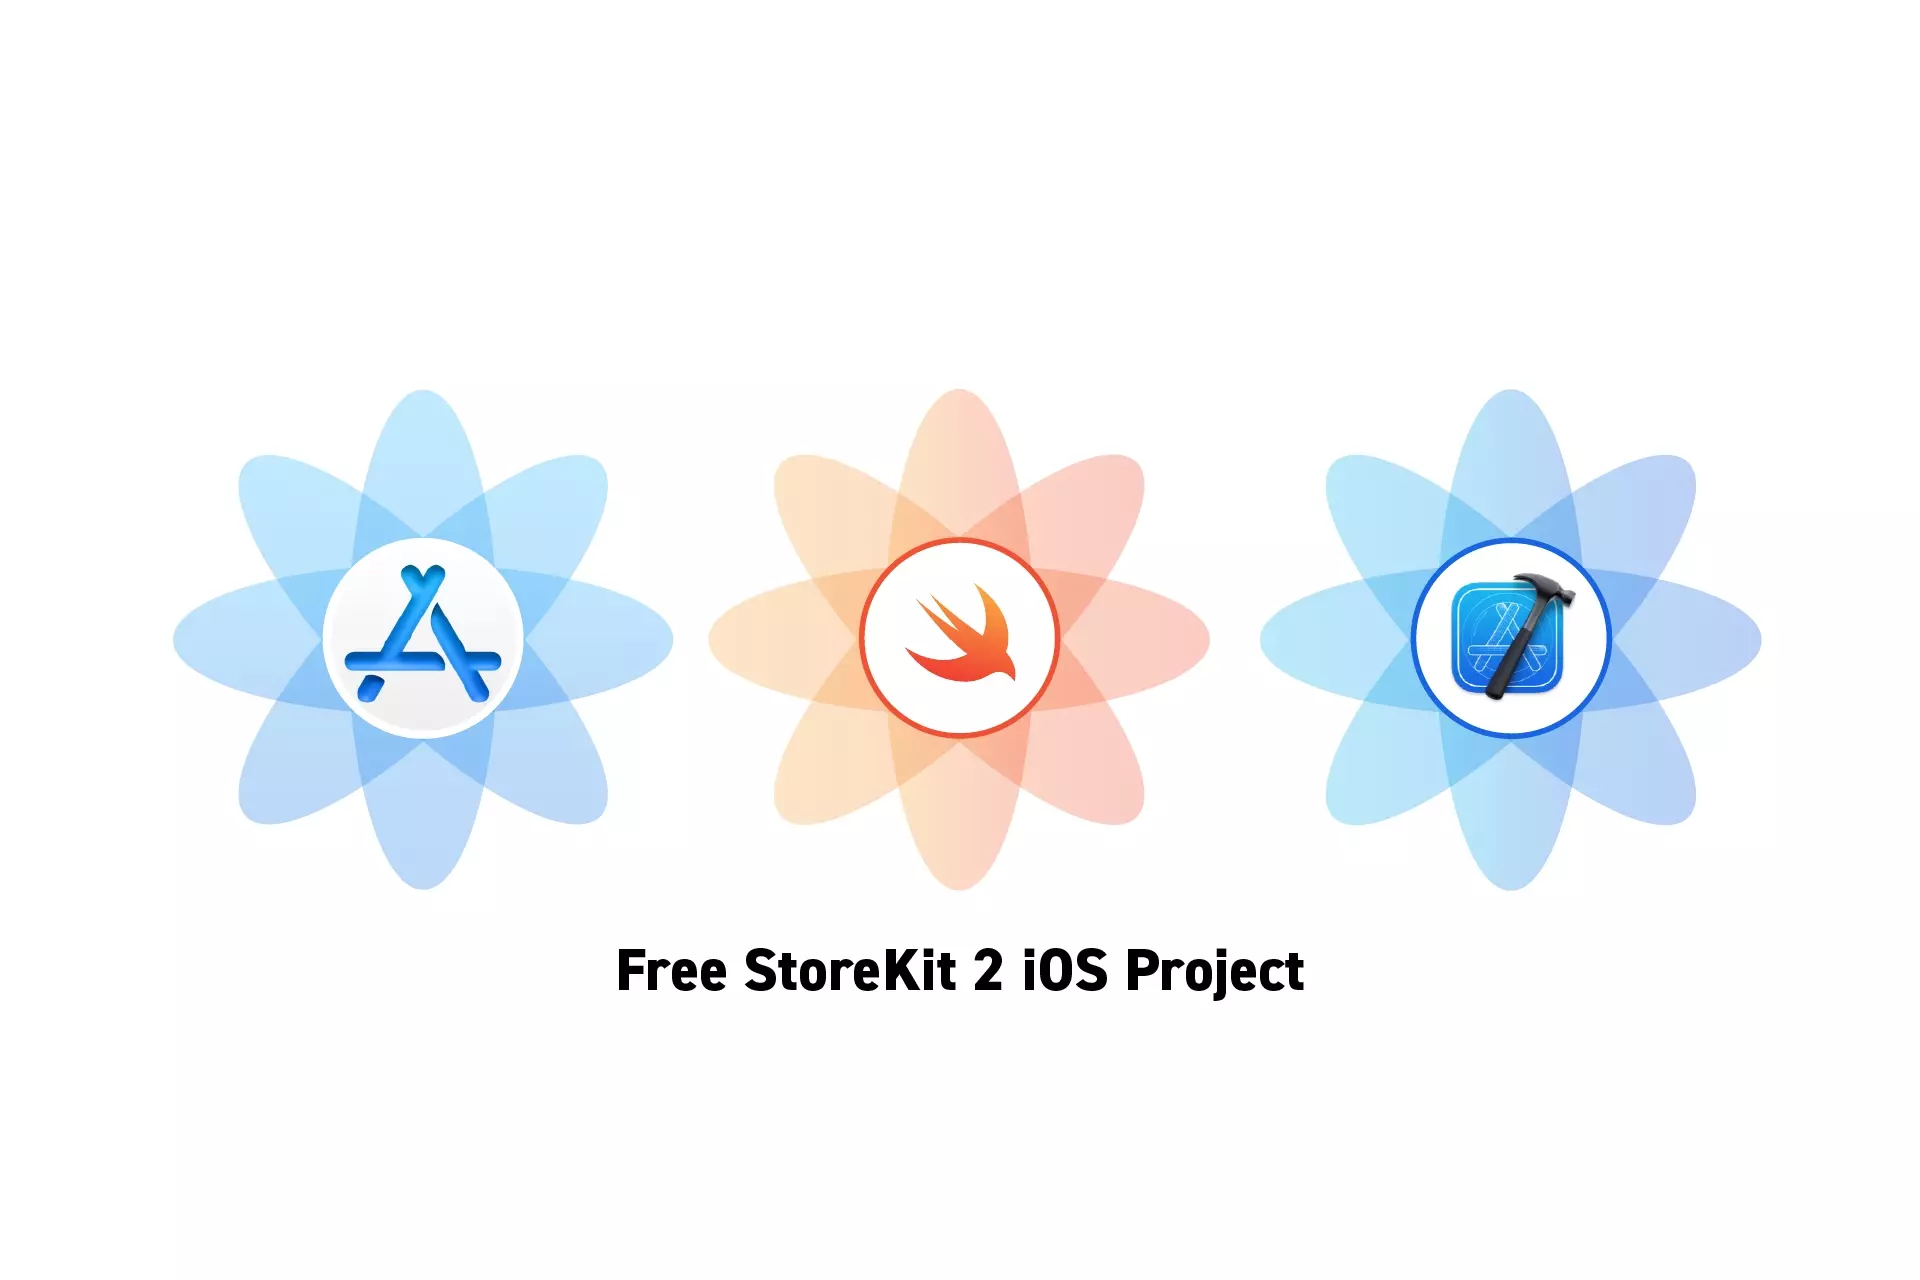 Three flowers that represent StoreKit, Swift and XCode side by side. Beneath them sits the text “Free StoreKit 2 iOS Project.”